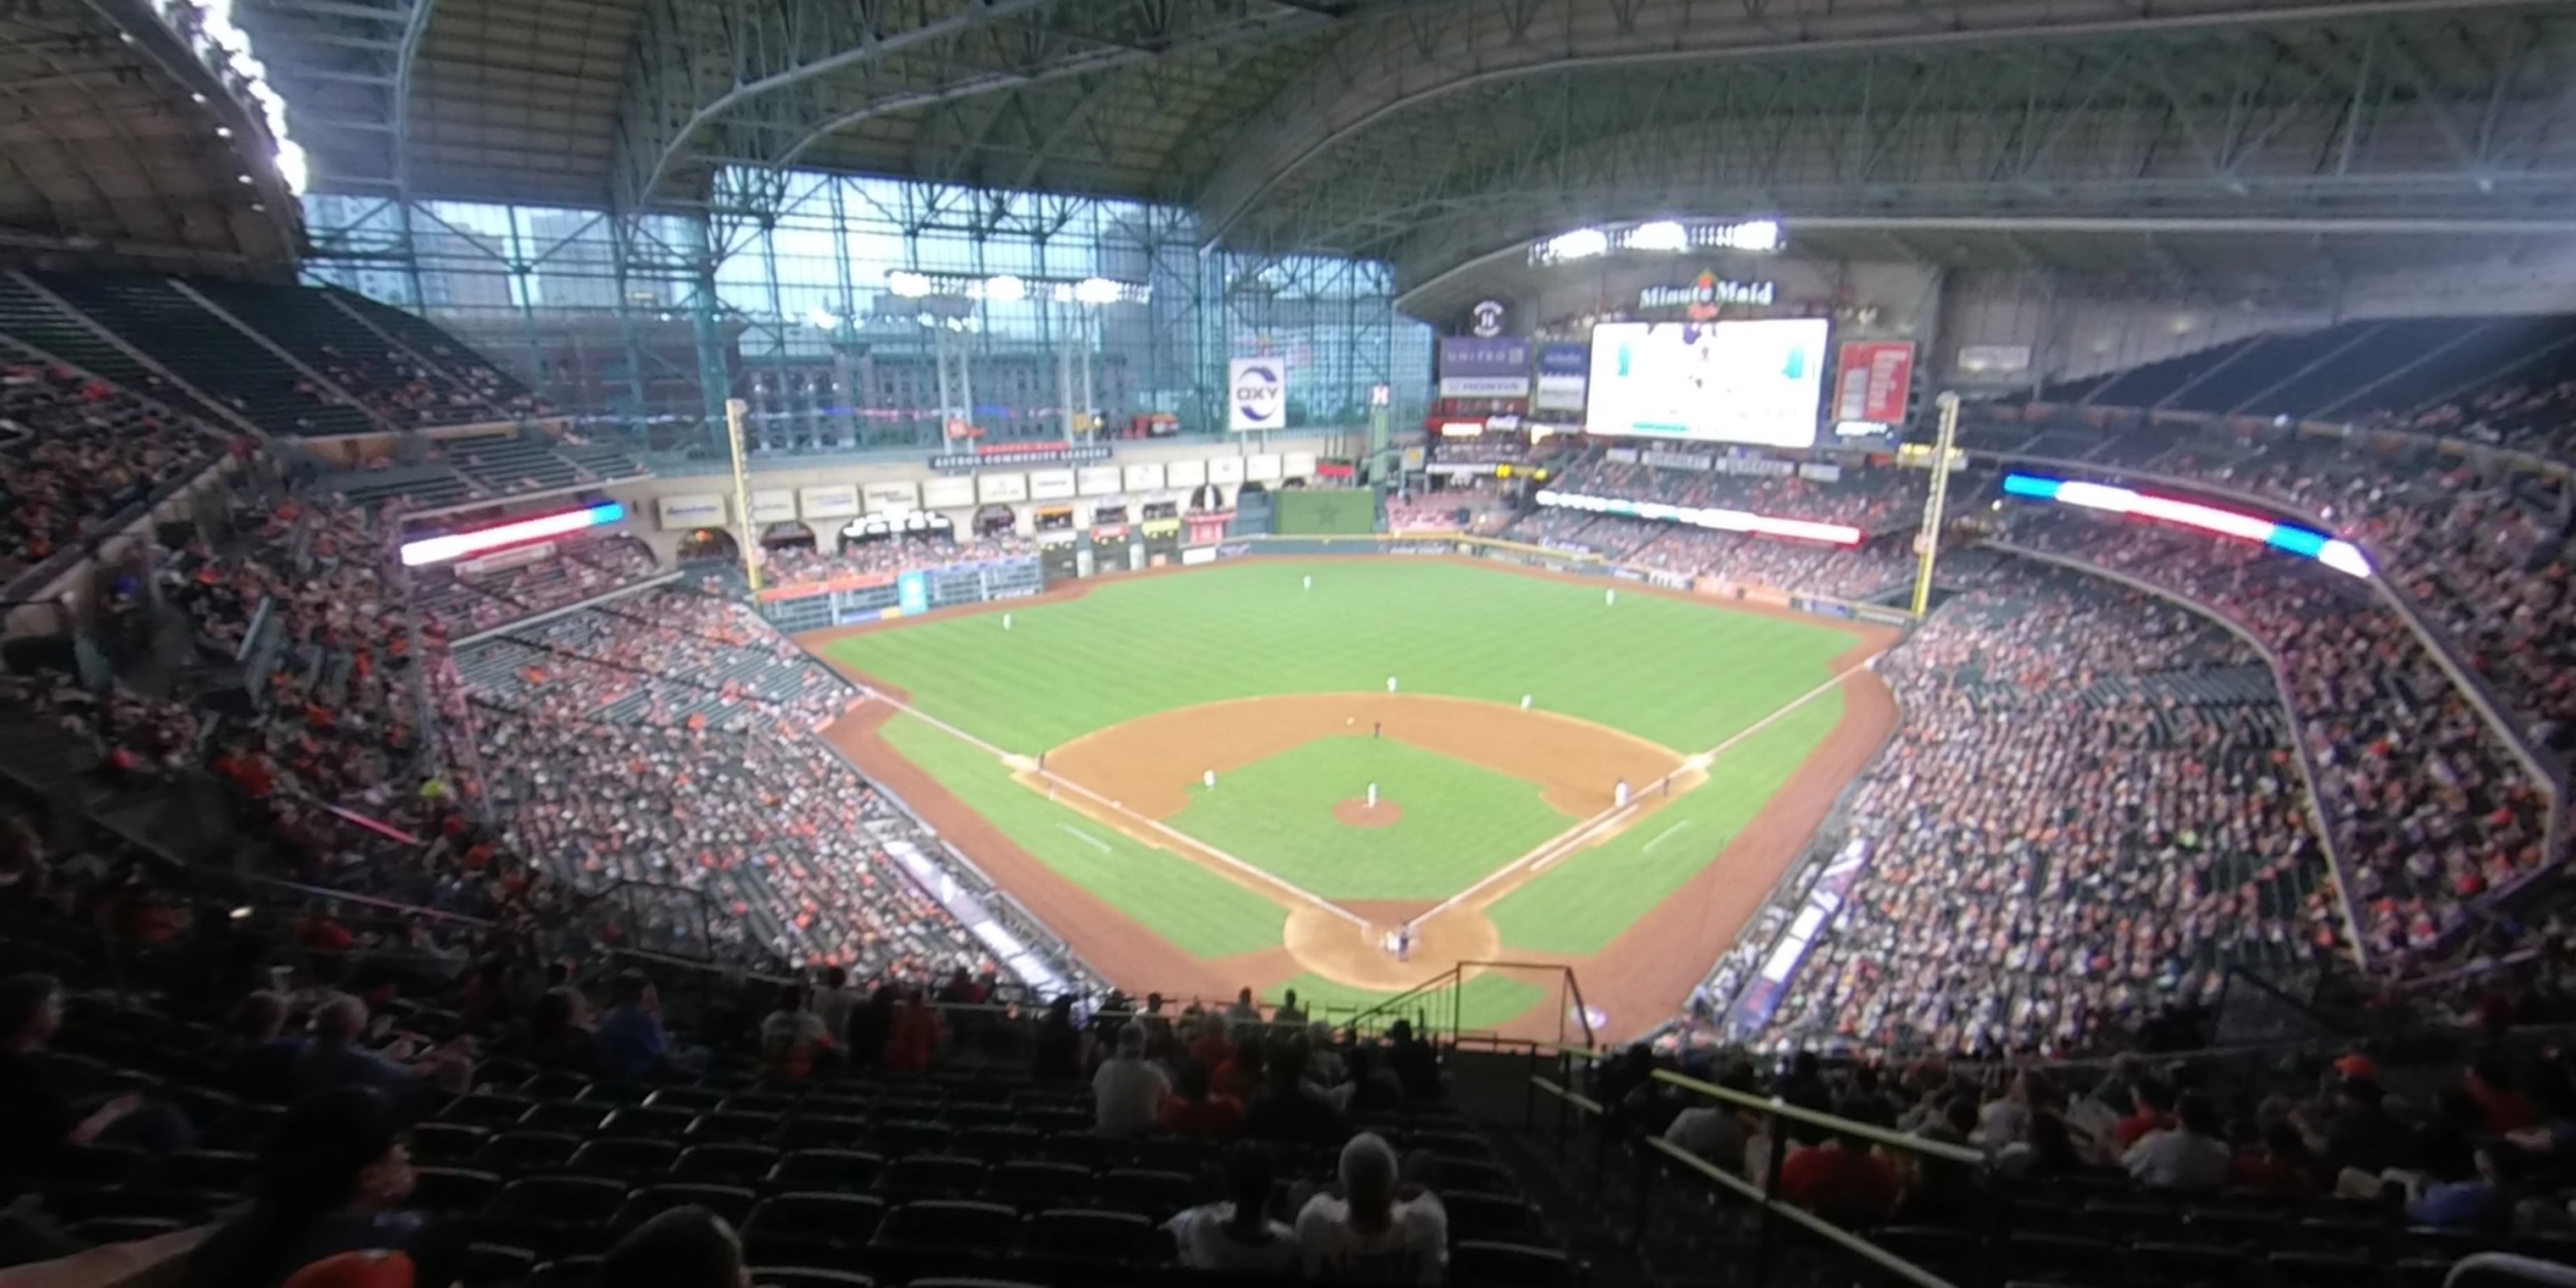 Section 418 at Minute Maid Park 